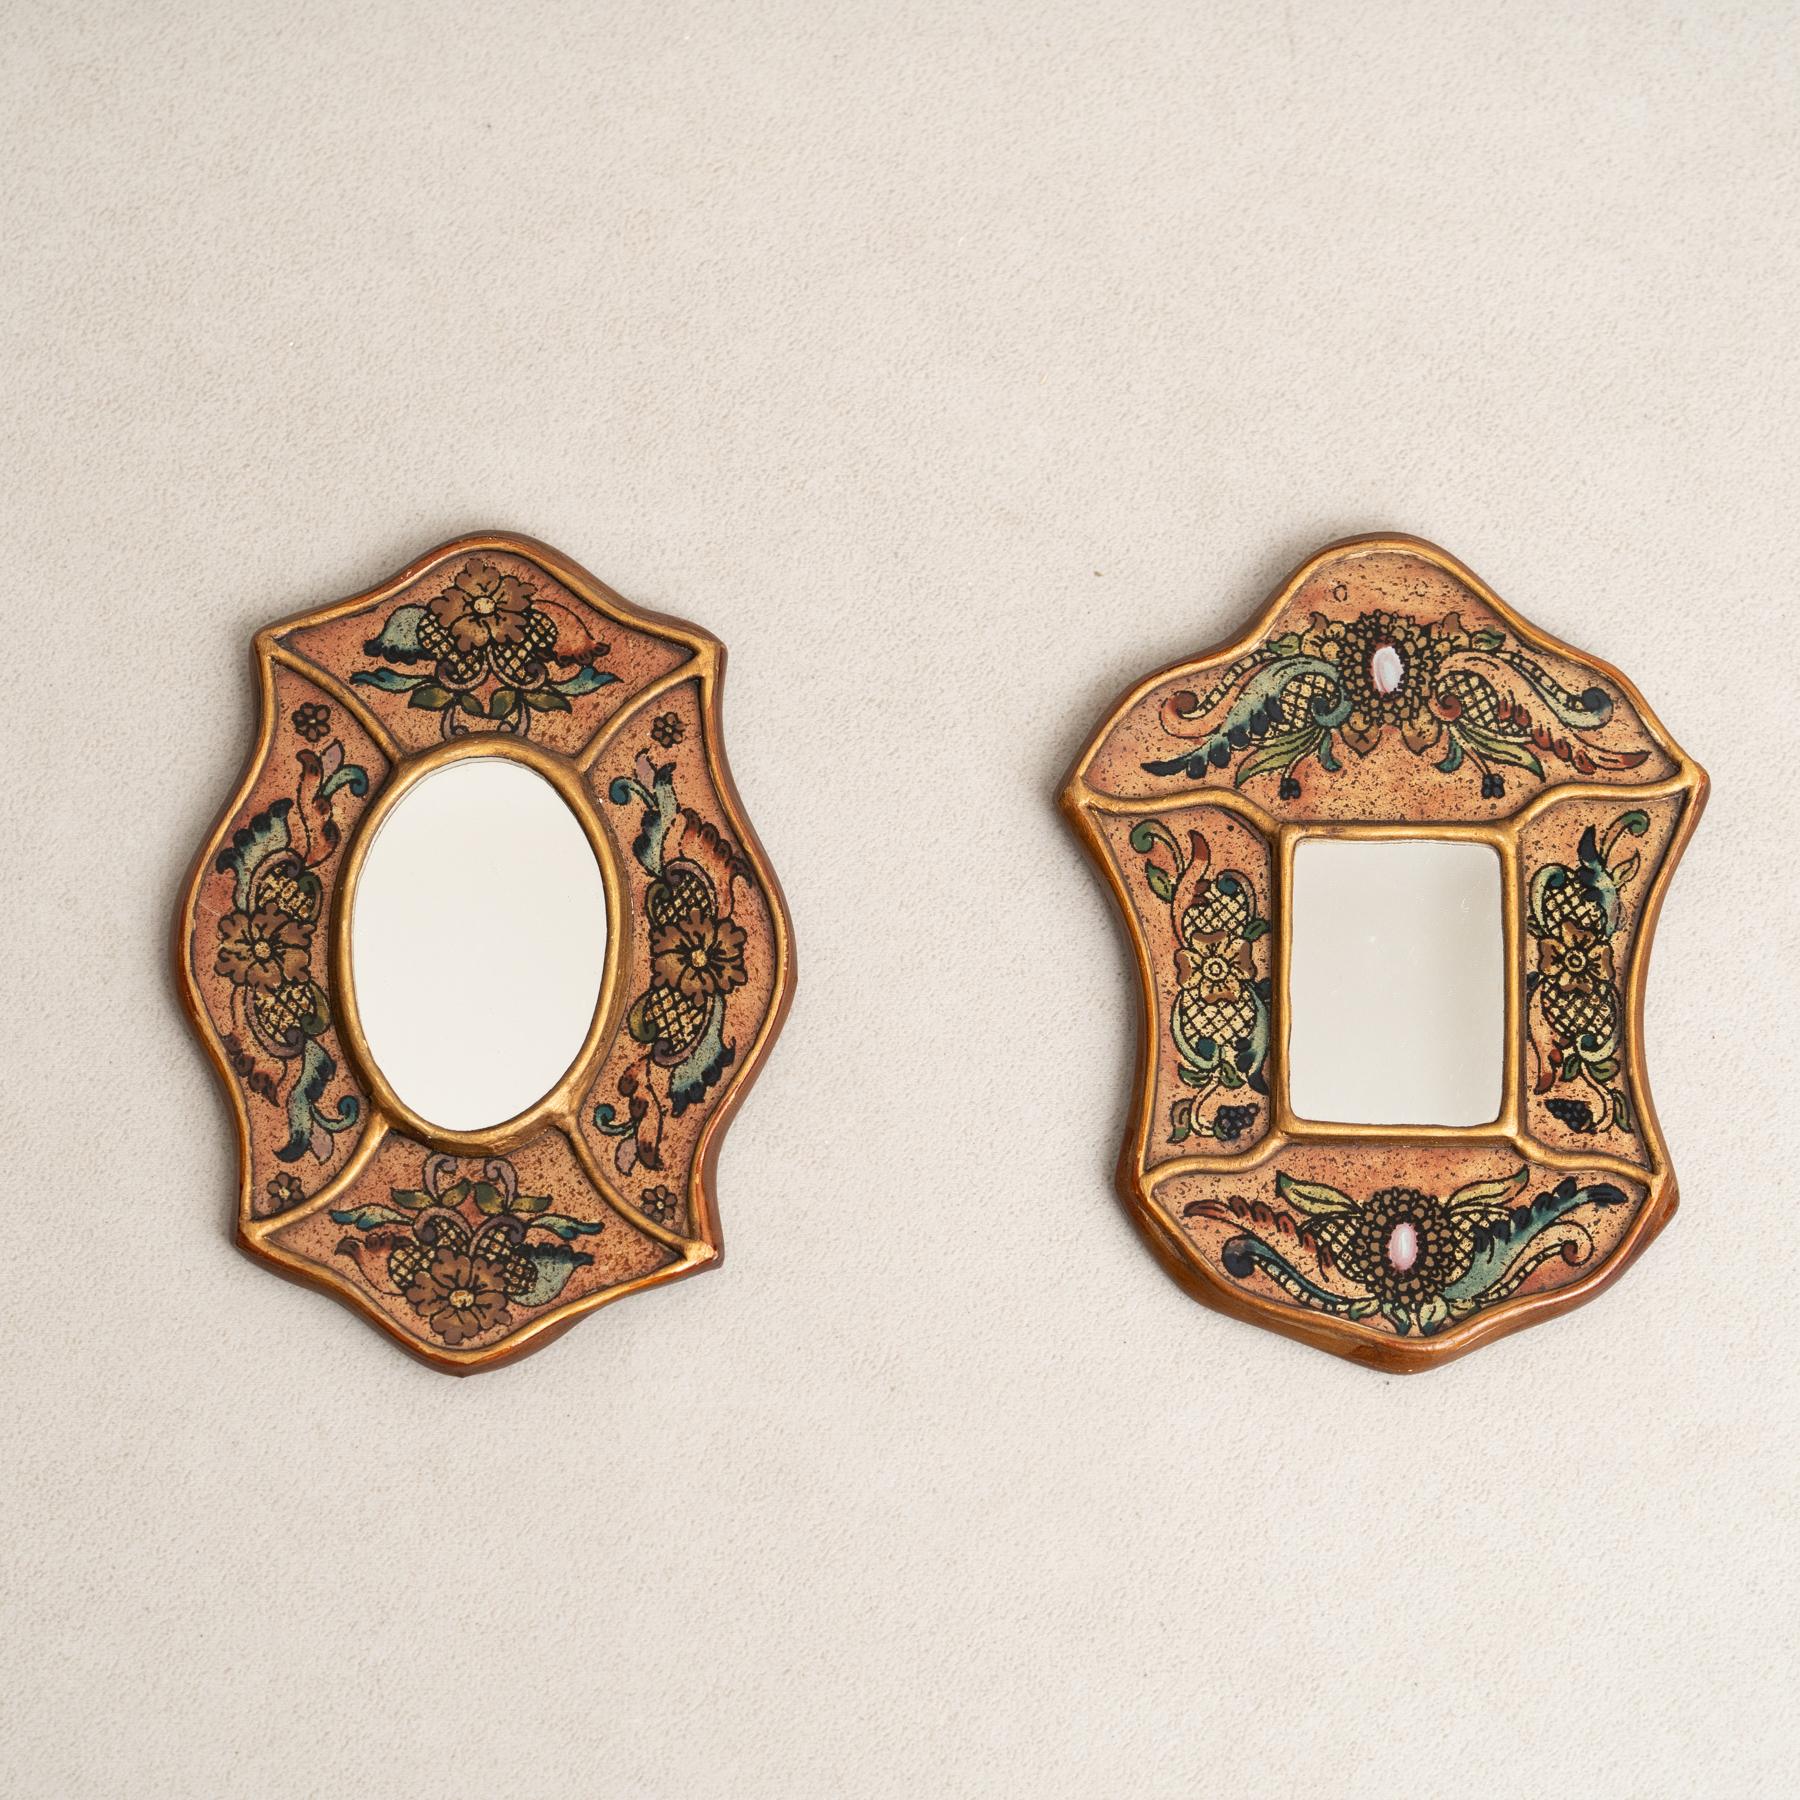 Set of Two Vintage Peruvian Mid-Century Hand-Painted Wooden Wall Mirrors.

Transport your decor to the golden era of mid-century elegance with this enchanting set of two small mirrors, originating from 1960s Peru. Crafted with meticulous